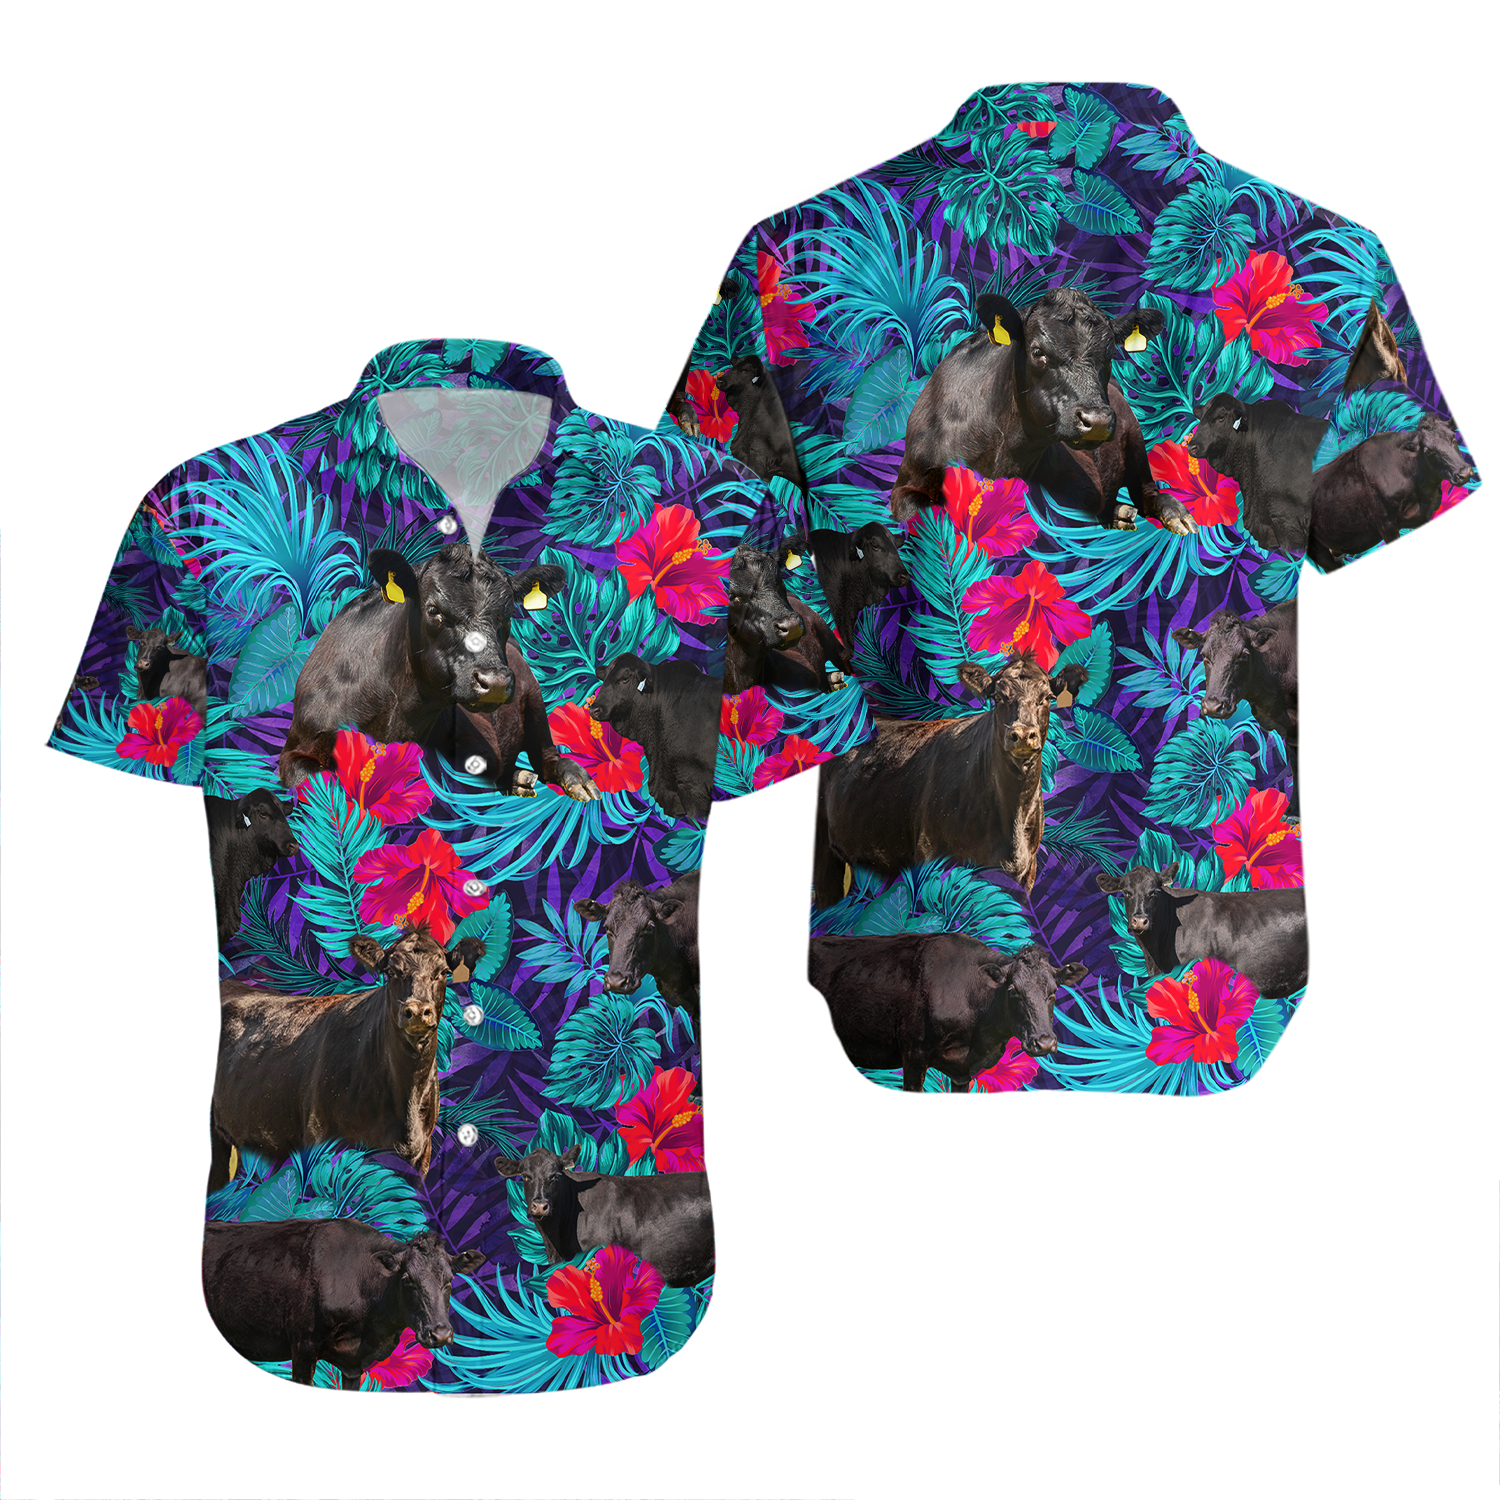 Black Angus Blue Neon Tropical Hawaii Shirt Cattle Shirt Black Angus Cattle Lovers Hawaiian Shirt – For Men And Women – Adult